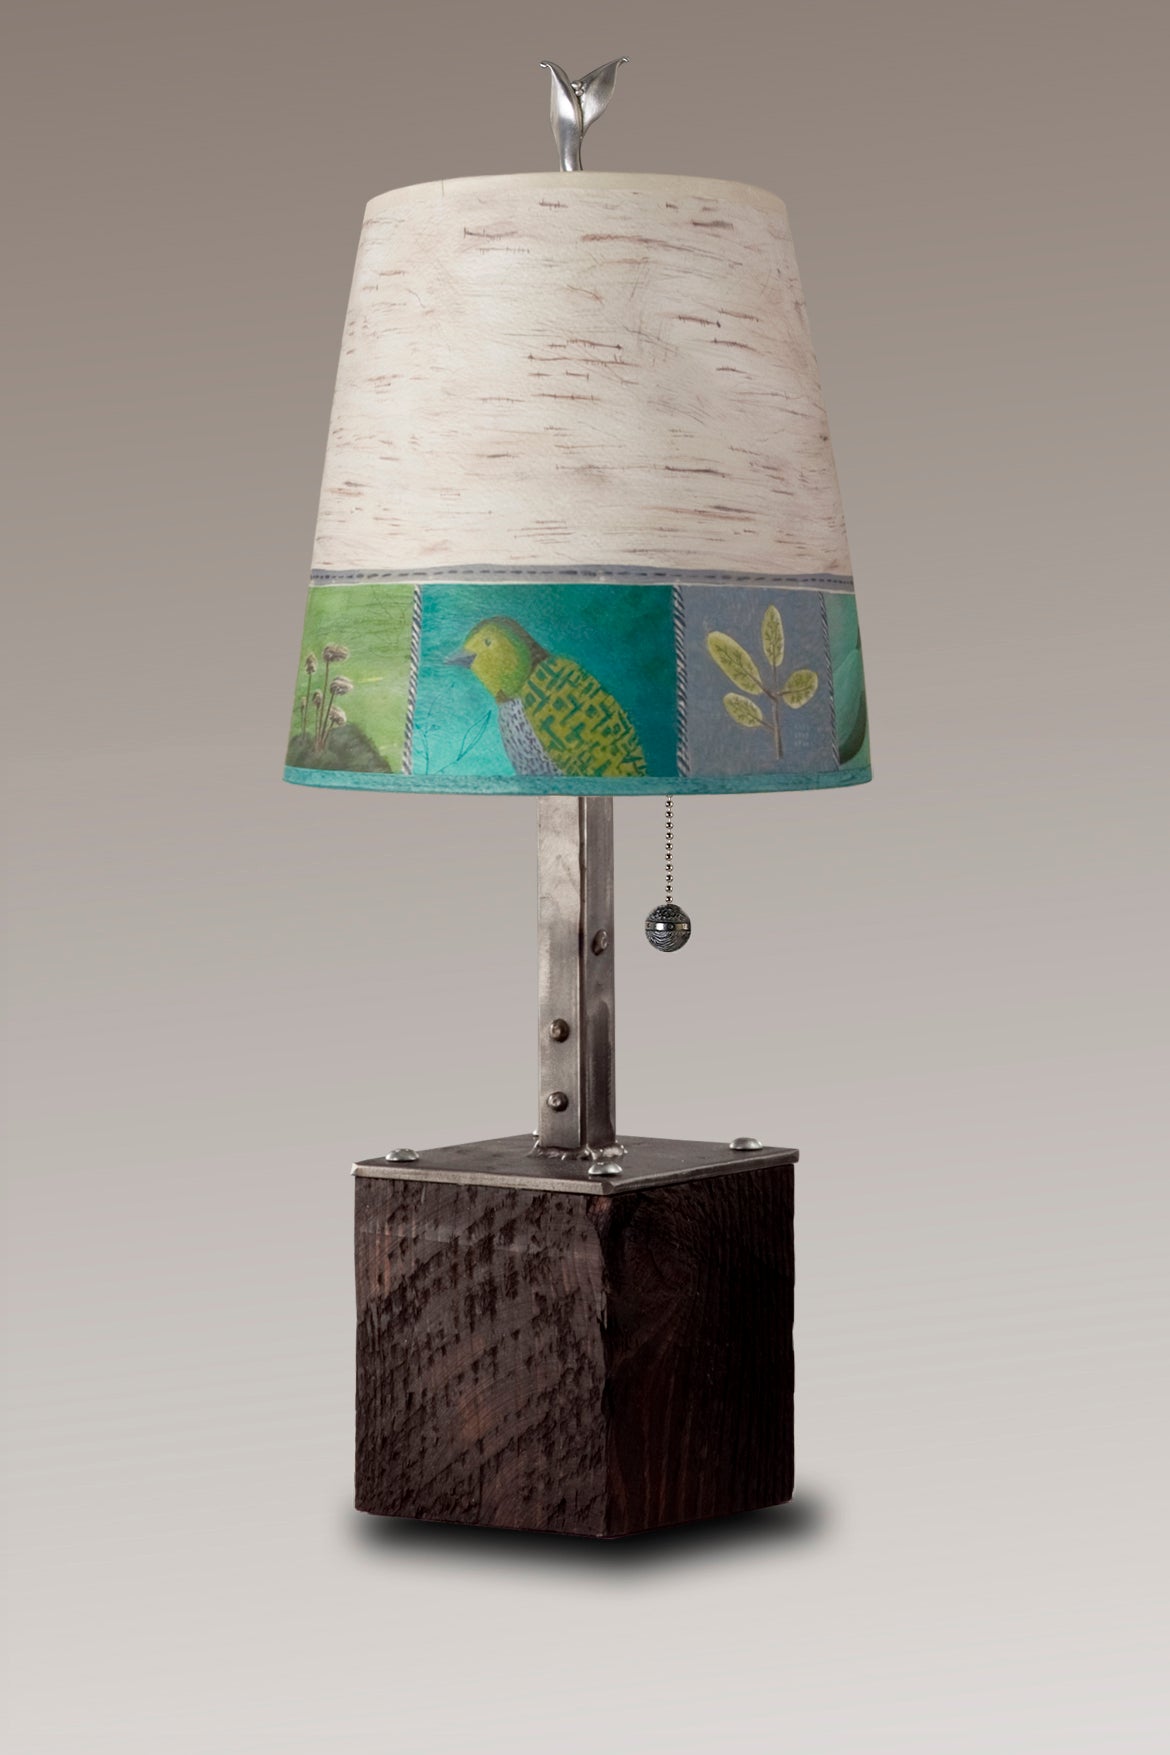 Janna Ugone & Co Table Lamps Steel Table Lamp on Reclaimed Wood with Small Drum Shade in Woodland Trails in Birch